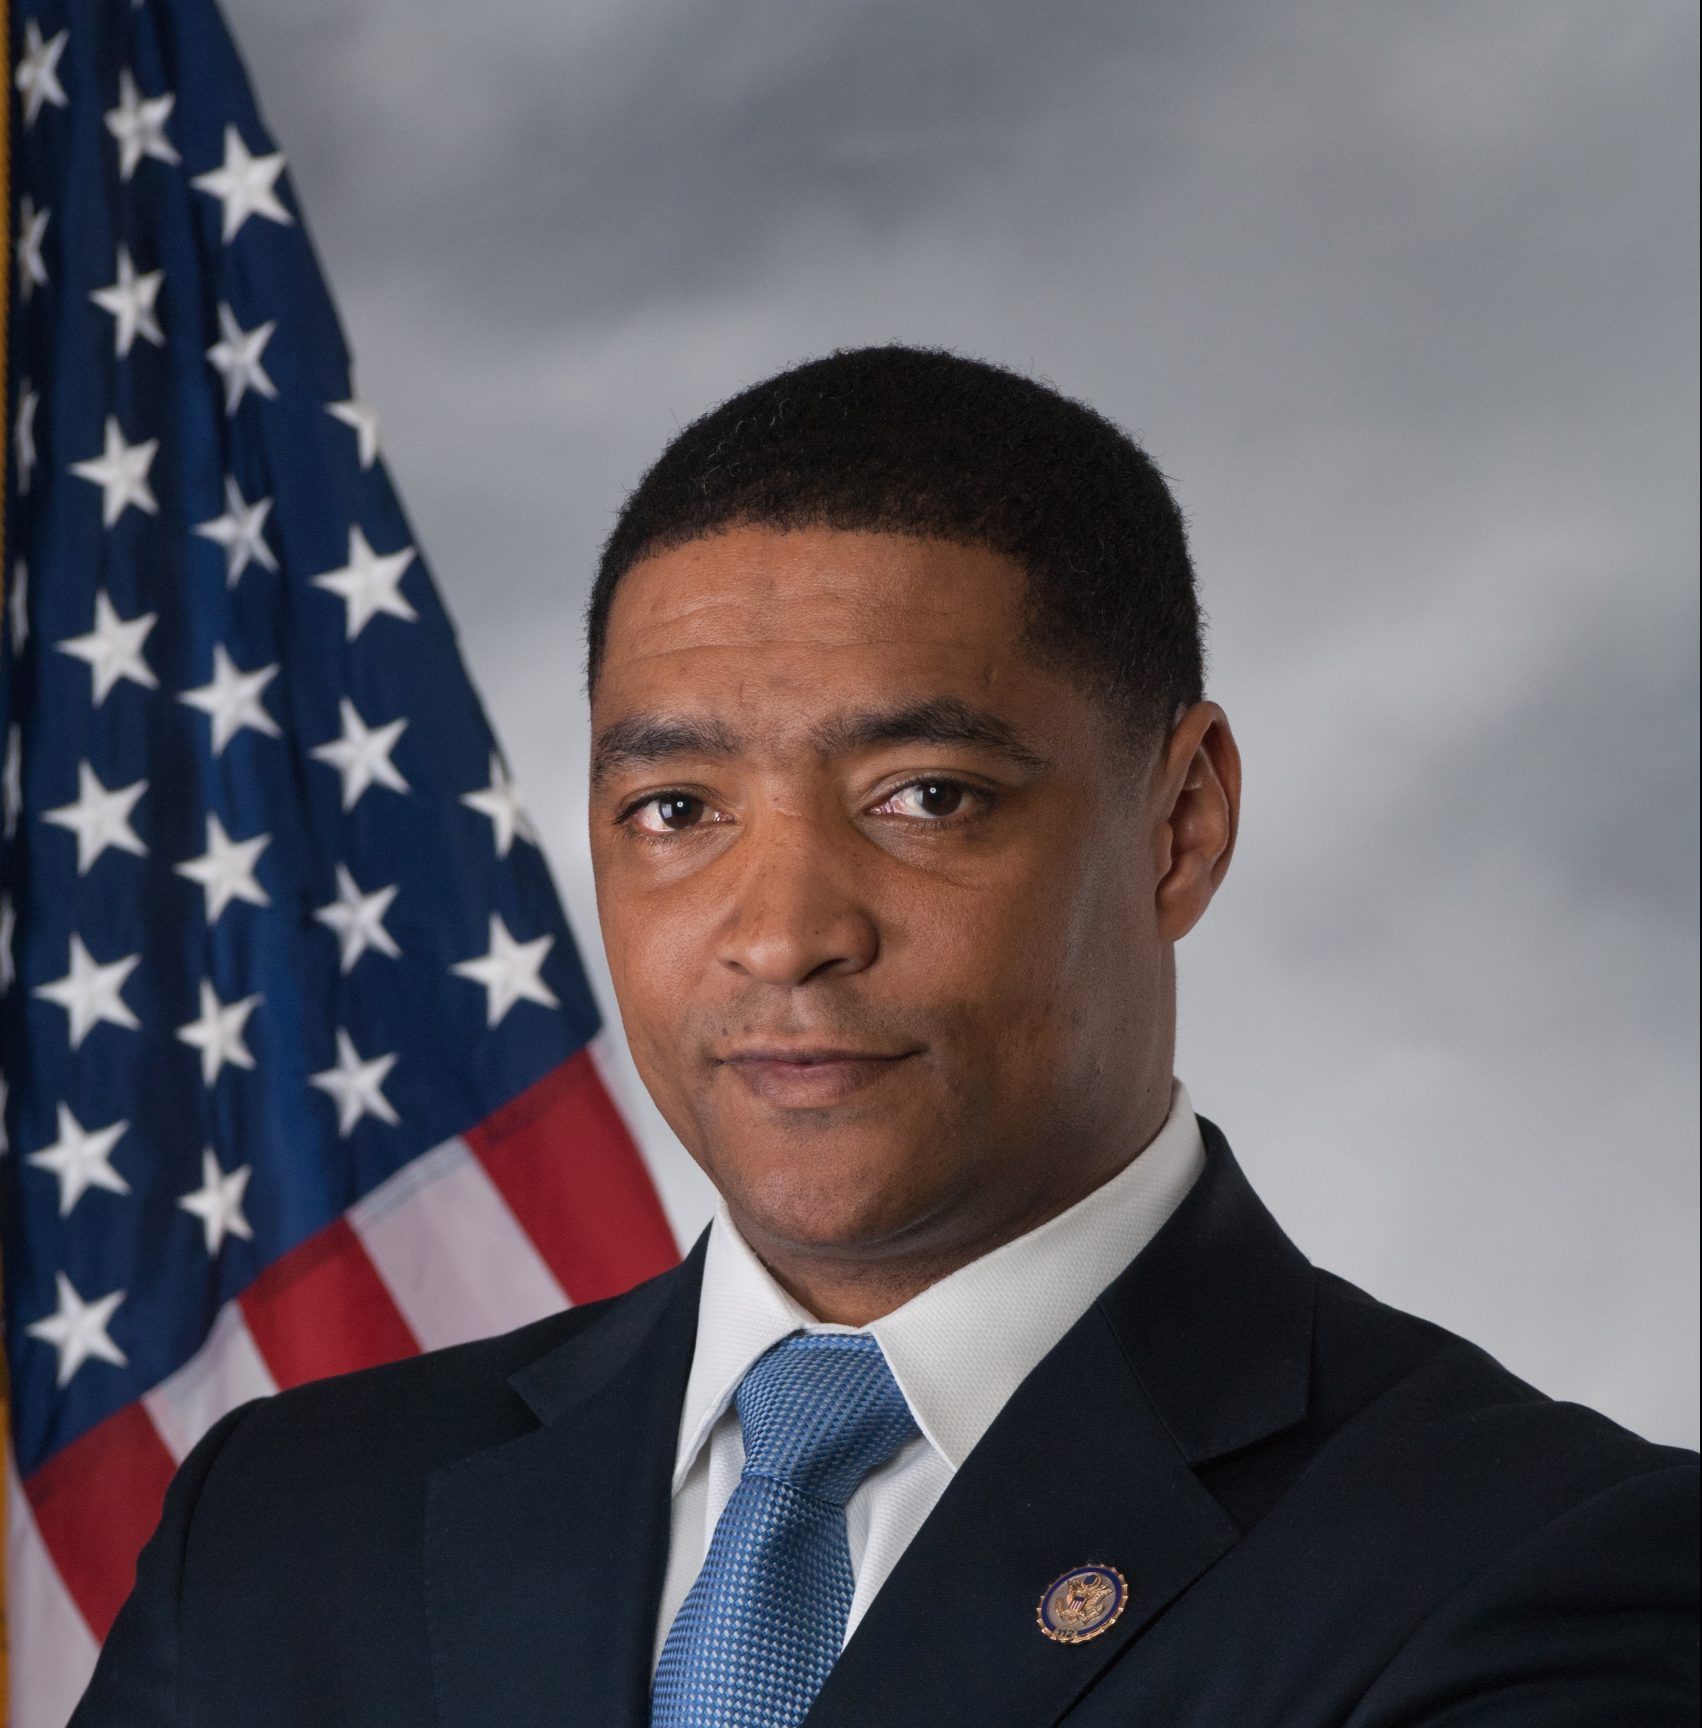 Cedric Richmond - Senior Advisor and Director of the White House Office of Public Engagement